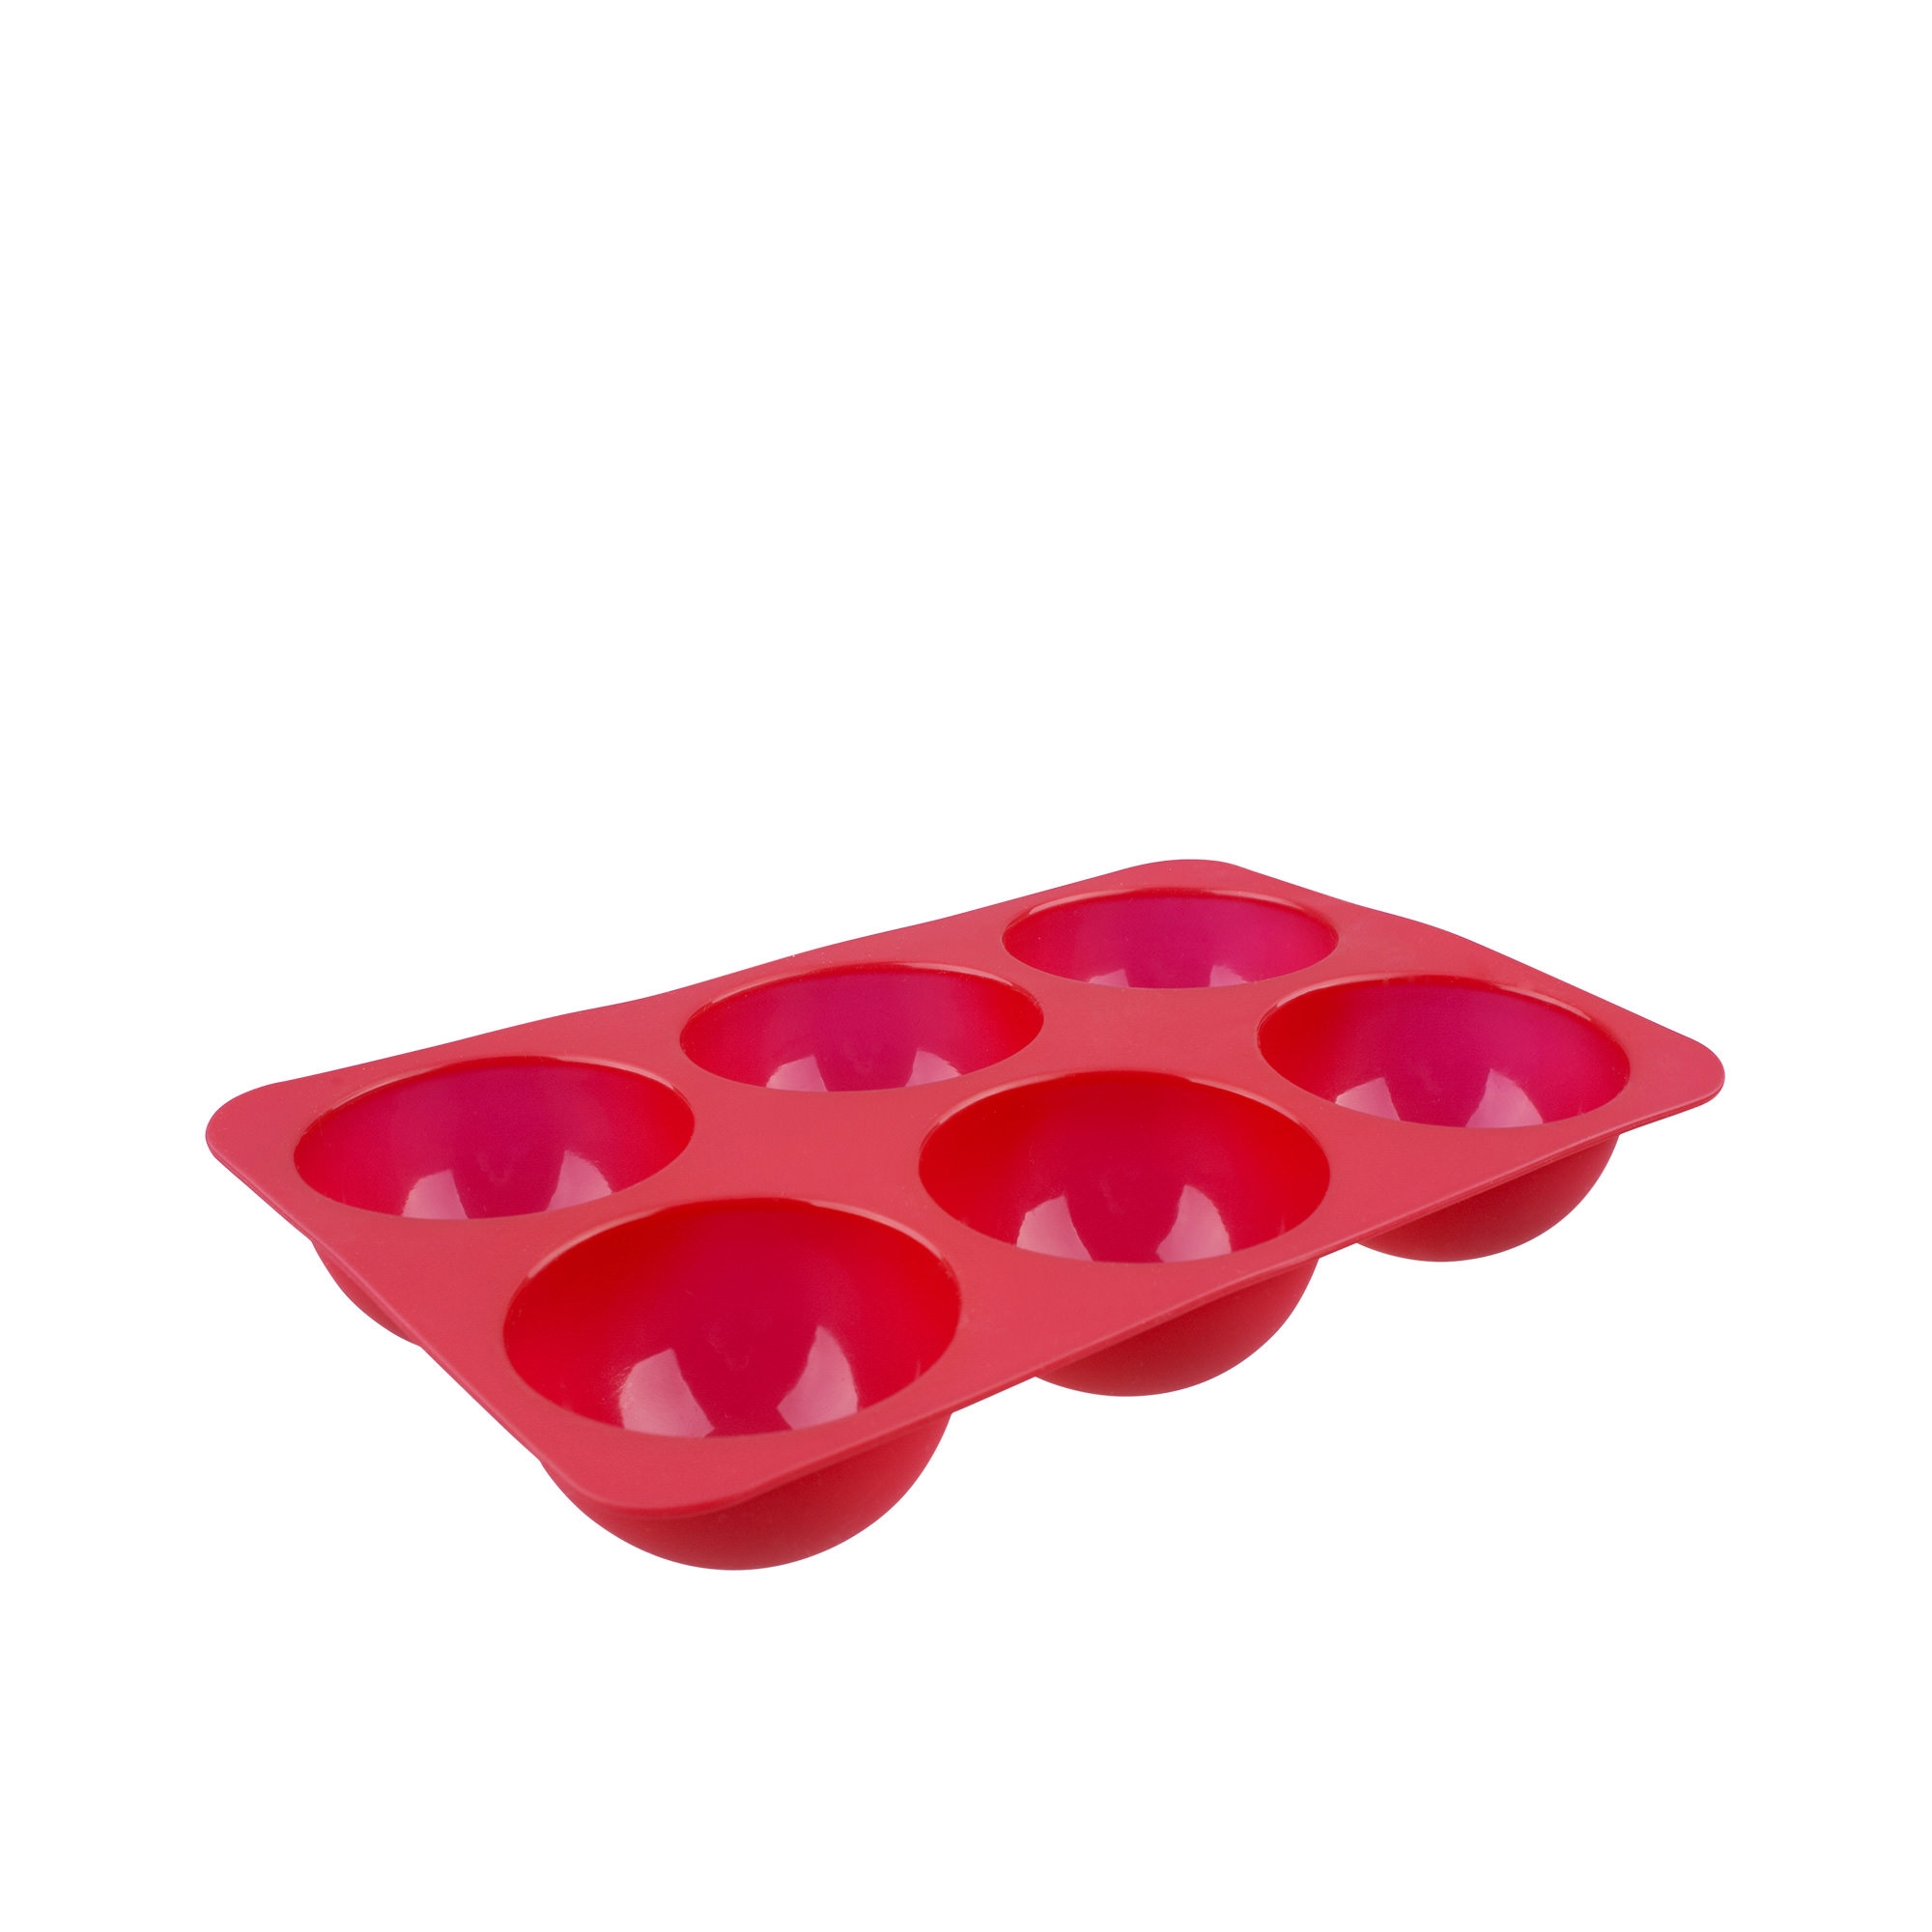 Daily Bake Dome Dessert Mould 6 Cup Red Image 1